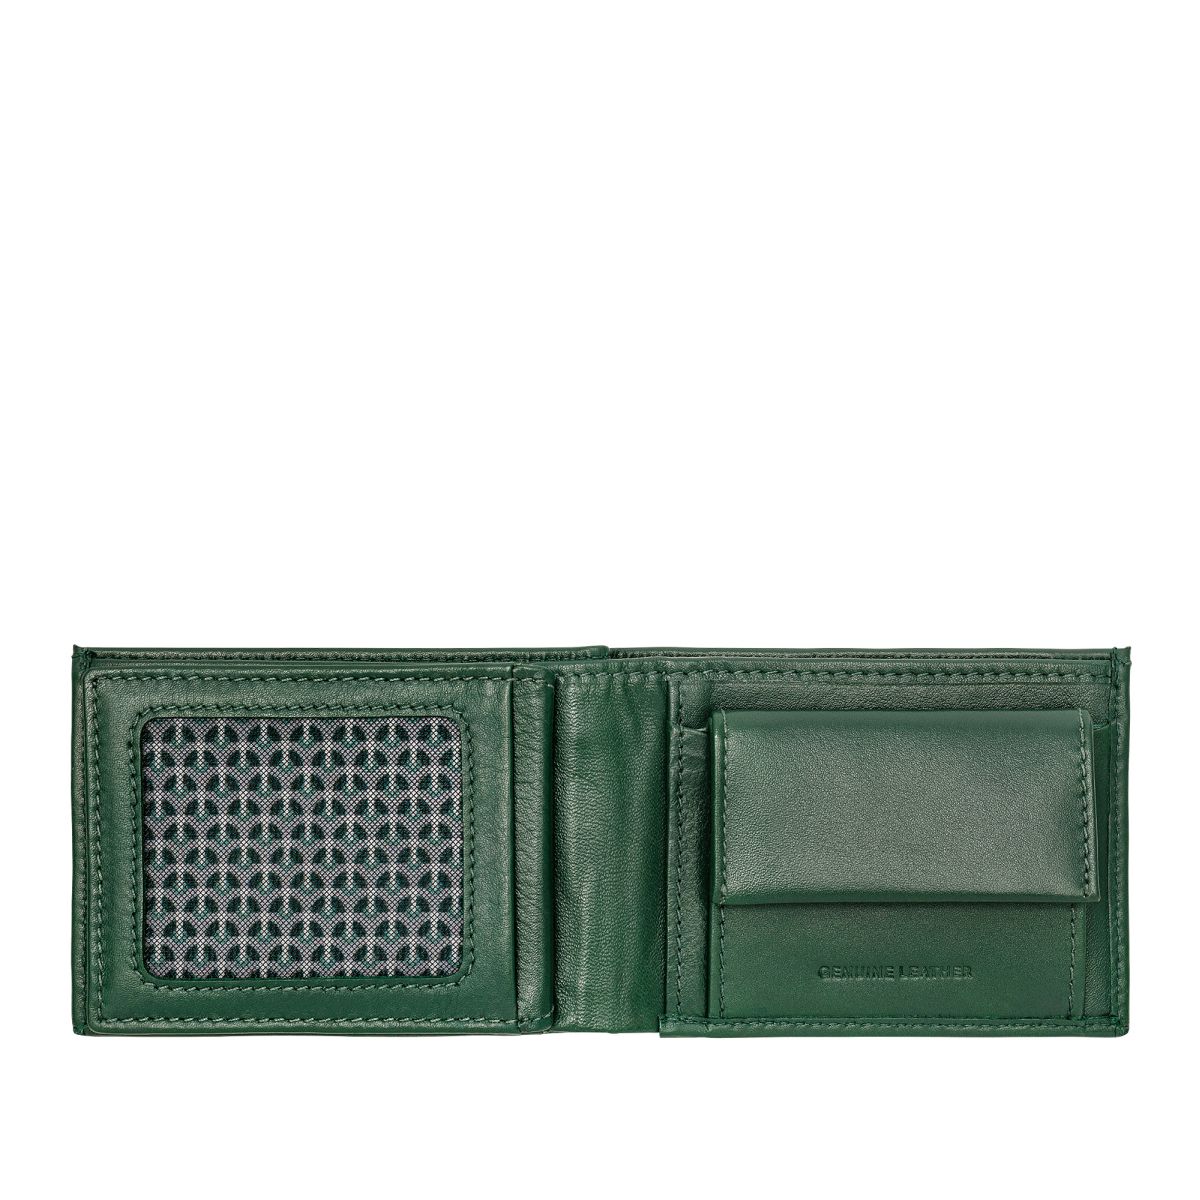 Small mens minimalist wallet with coins pocket - Green